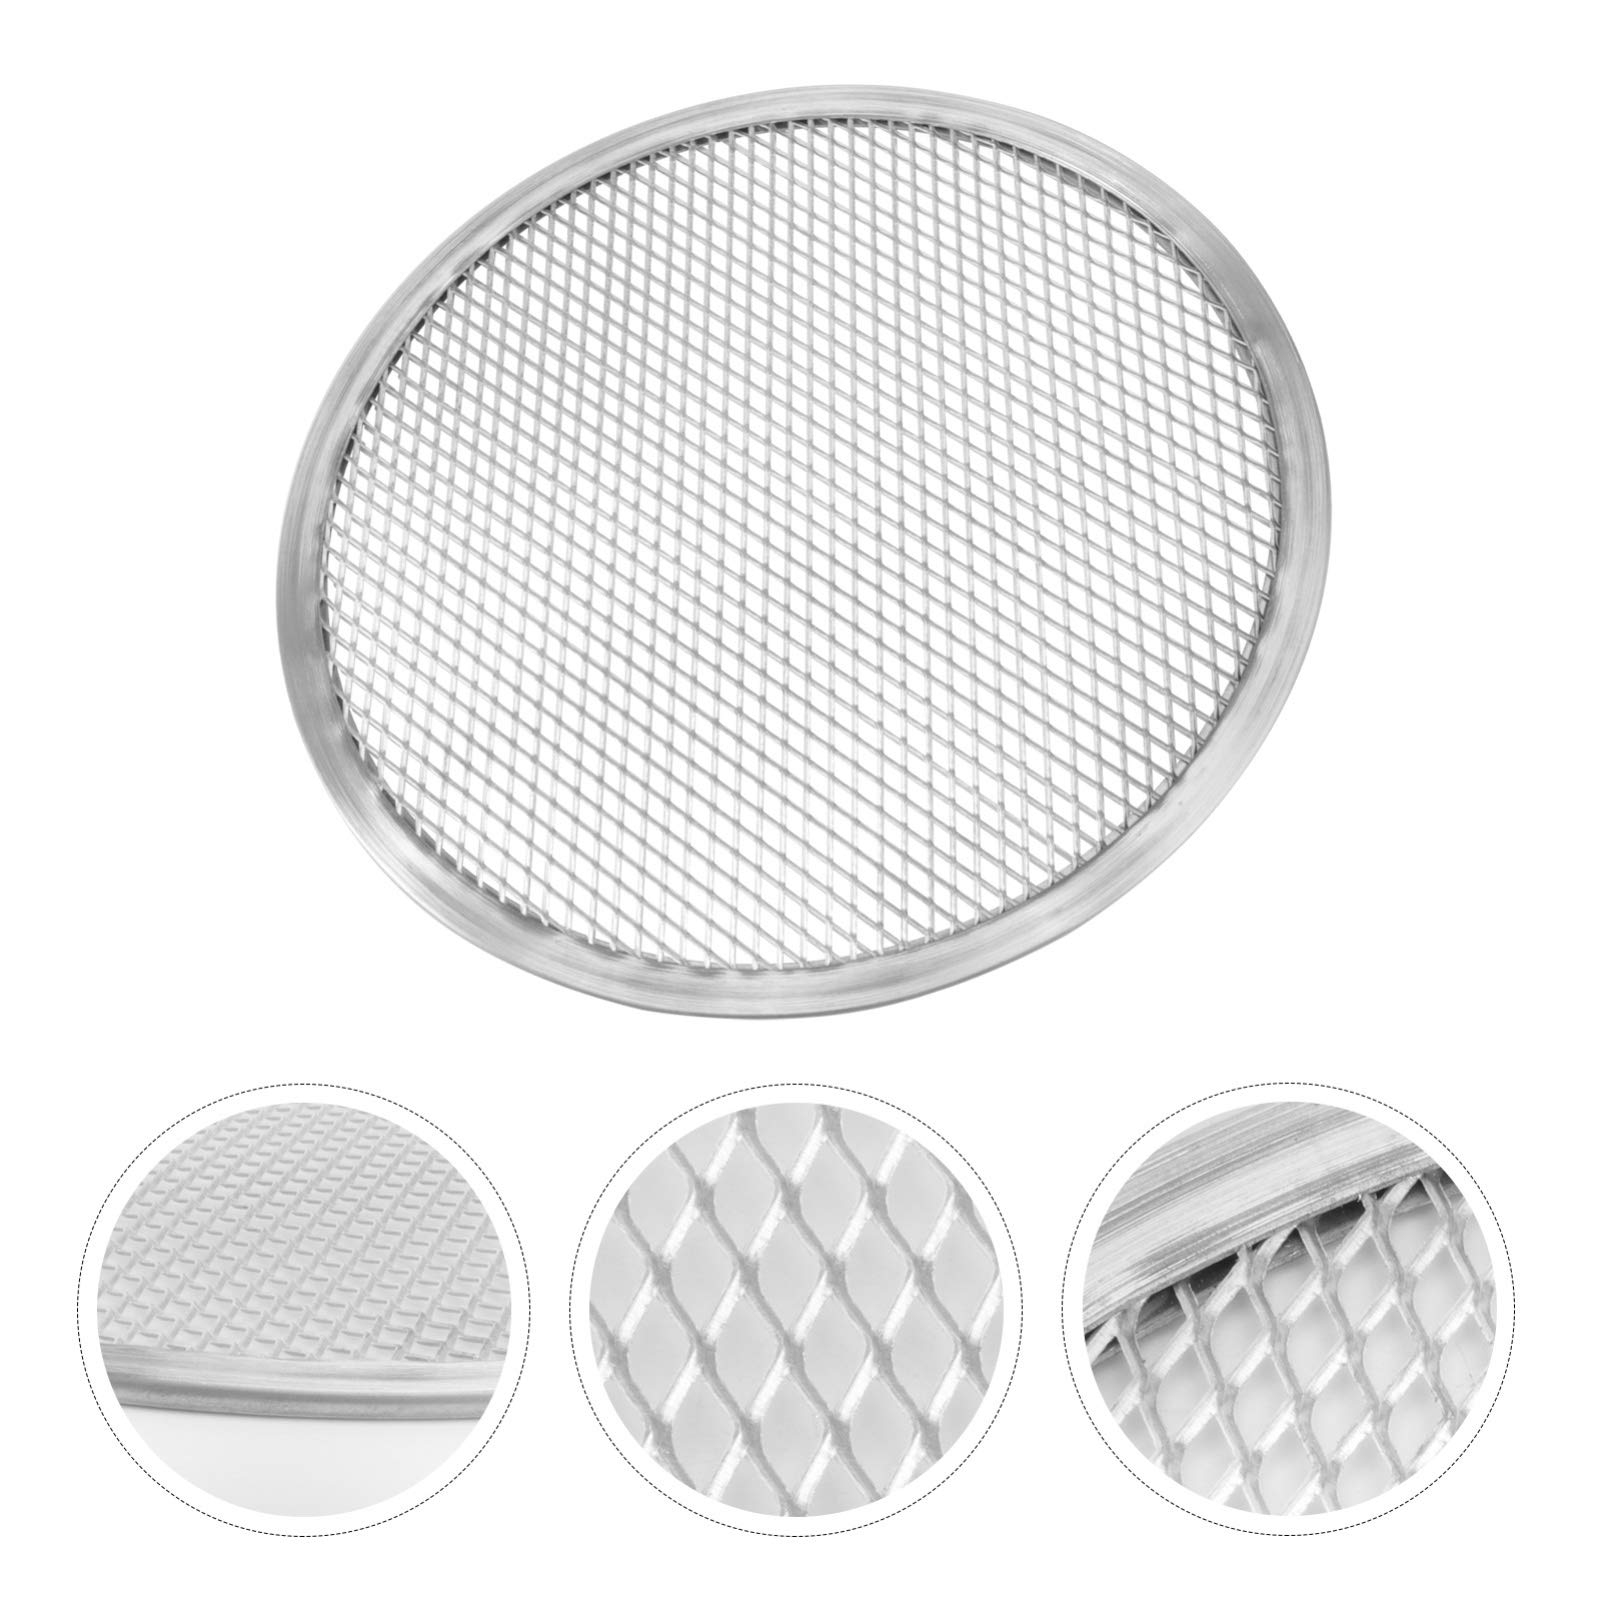 Healvian 20 Inches Pizza Pan Aluminum Pizza Rack Pizza Plate Seamless Pizza Baking Screen with The Holes Pizza Tray for Oven